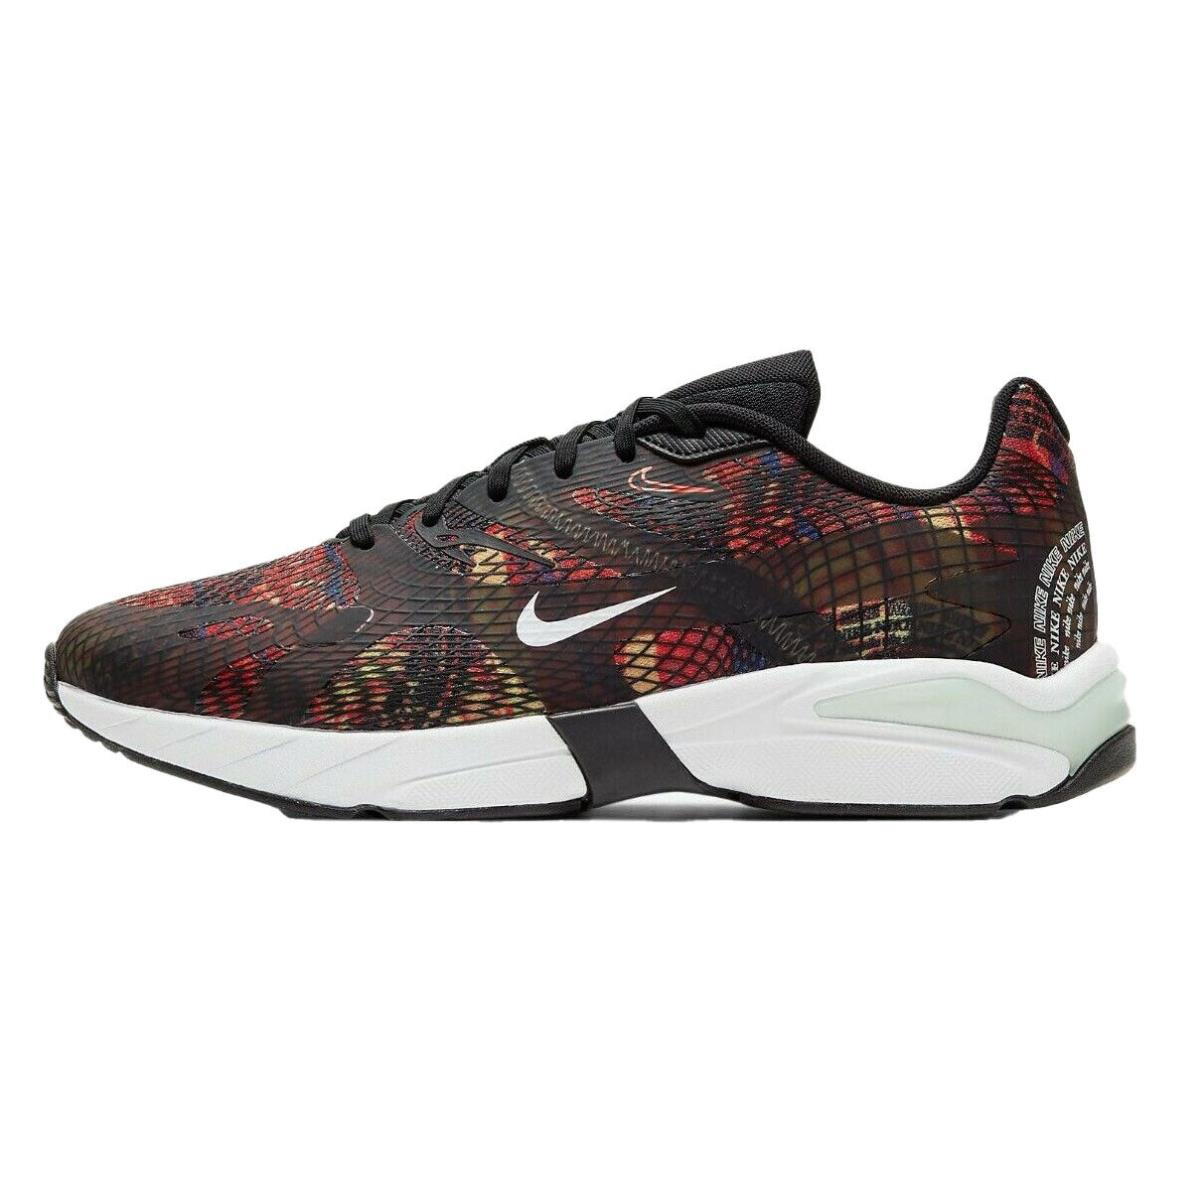 Nike Ghoswift Running Shoes CU4737 001 Black/multi-color